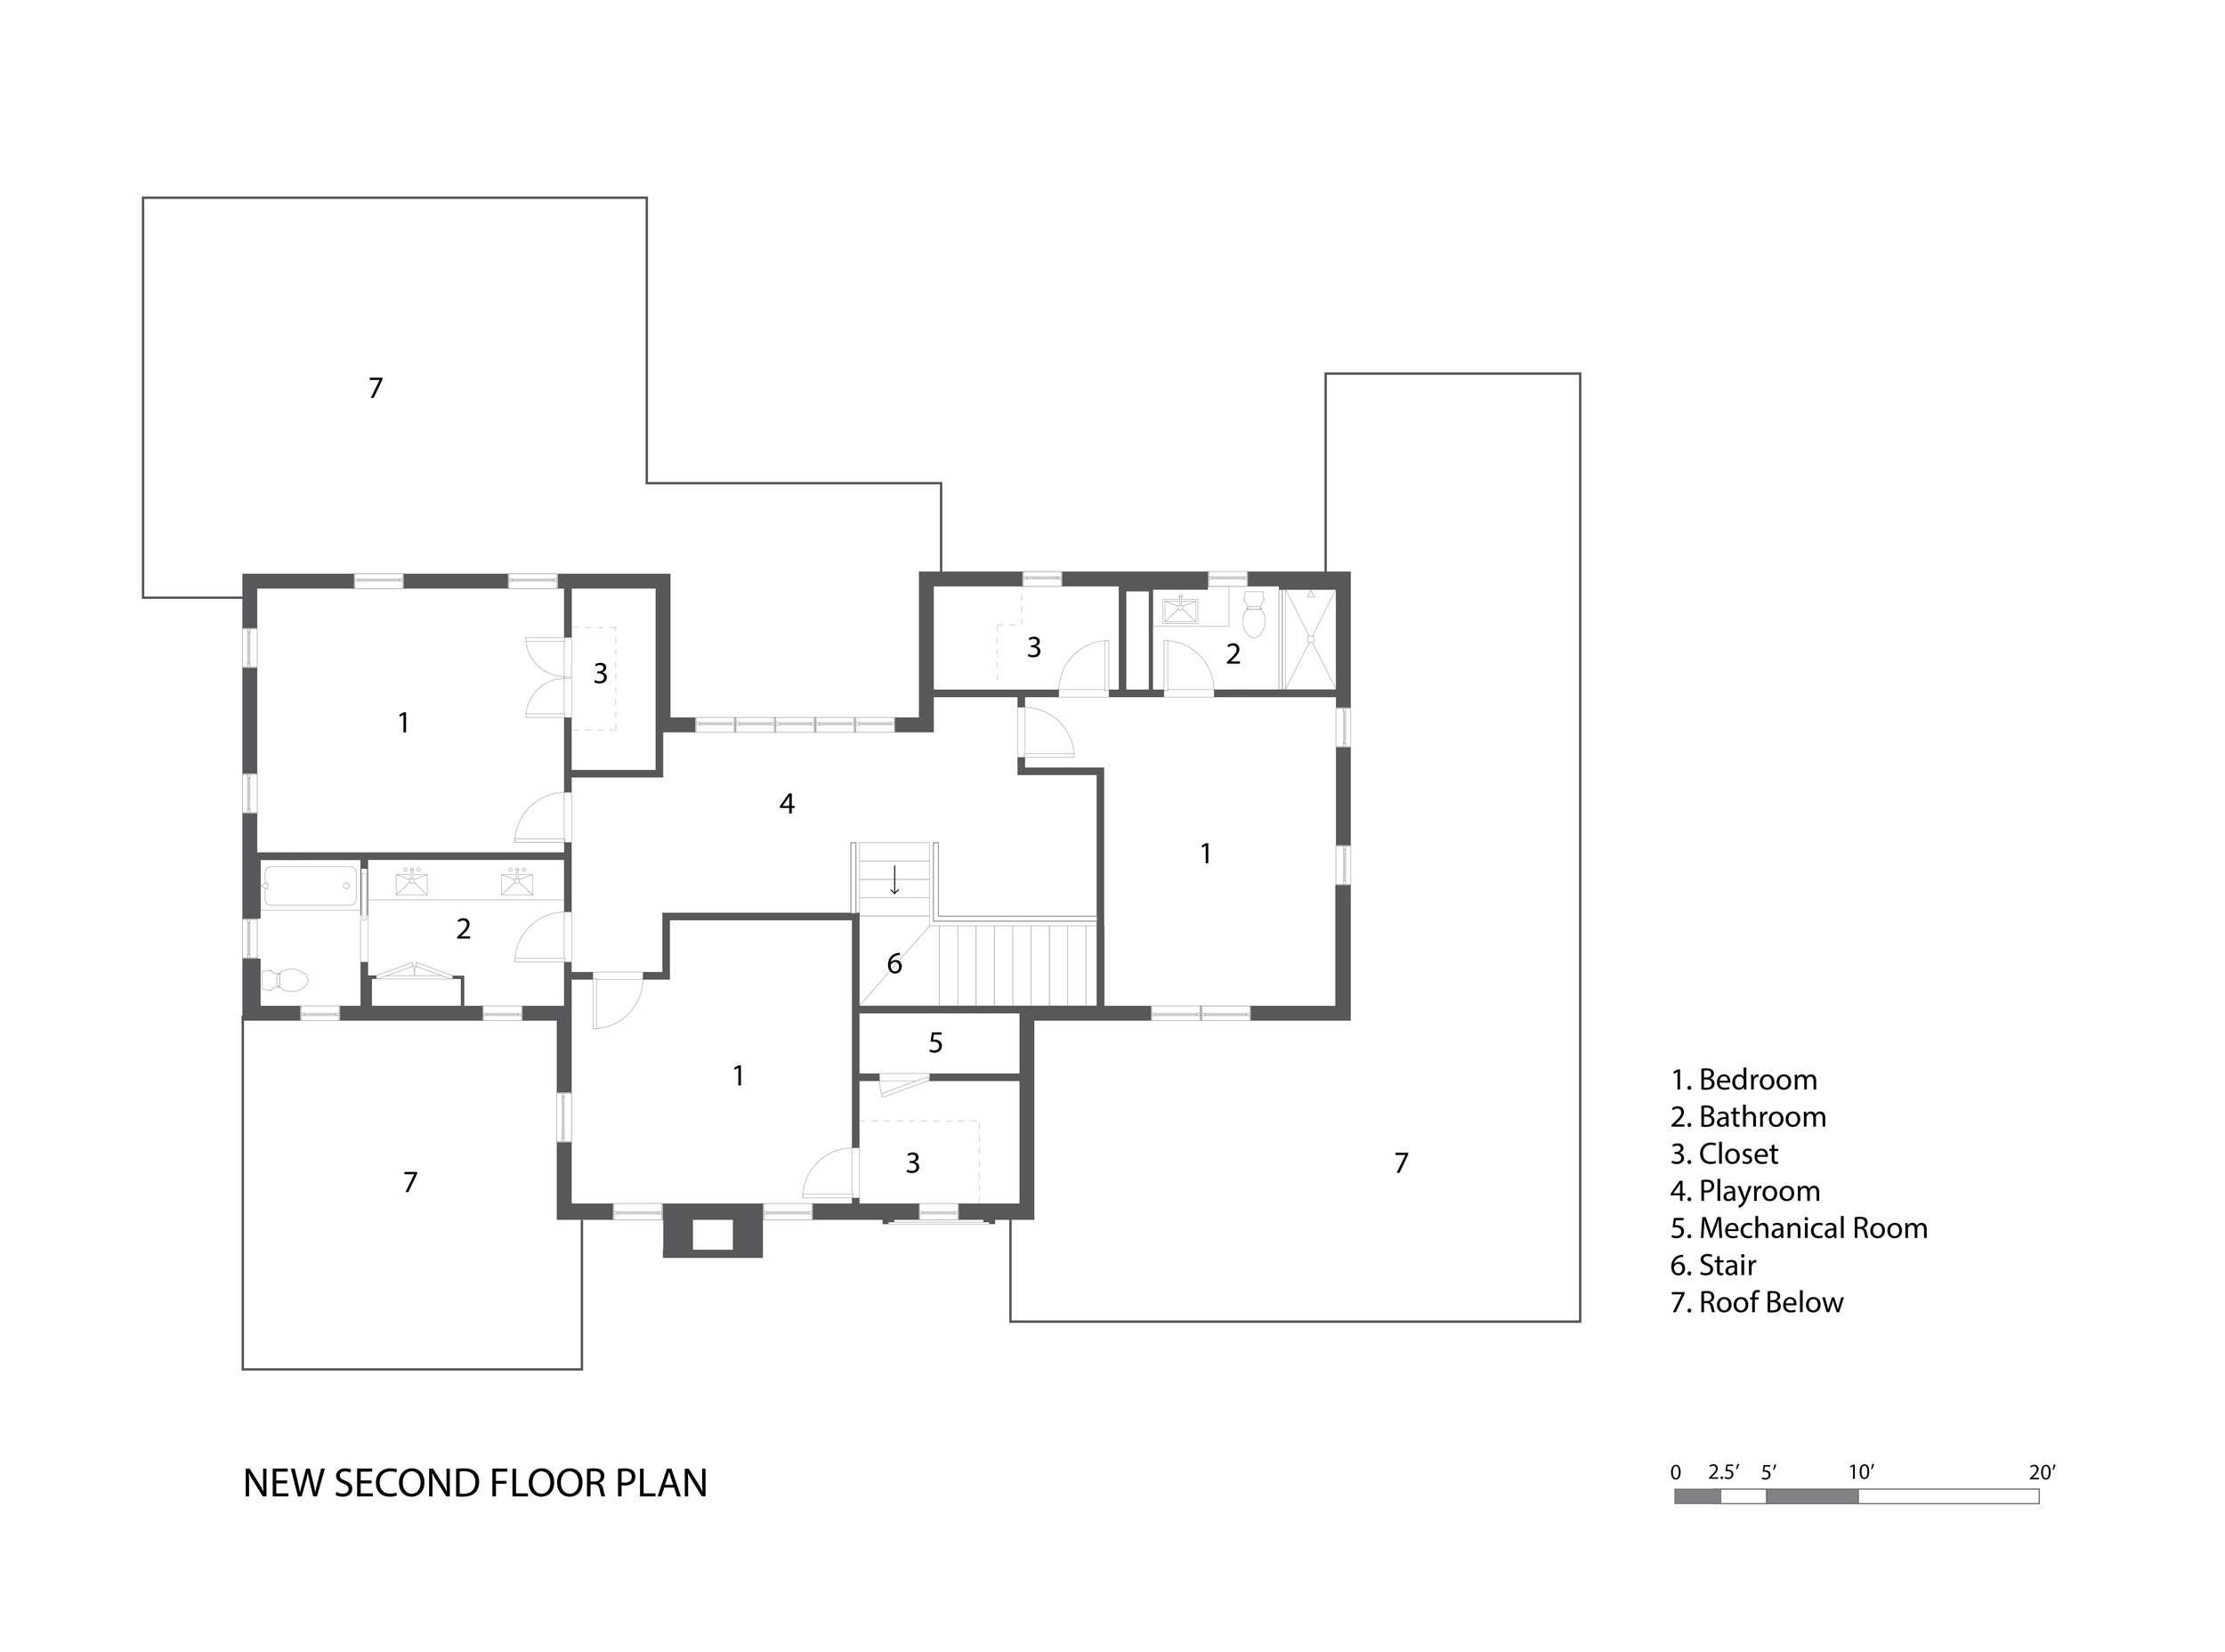 Elizabeth-Baird-Architecture-Southhill- second floor plan.png